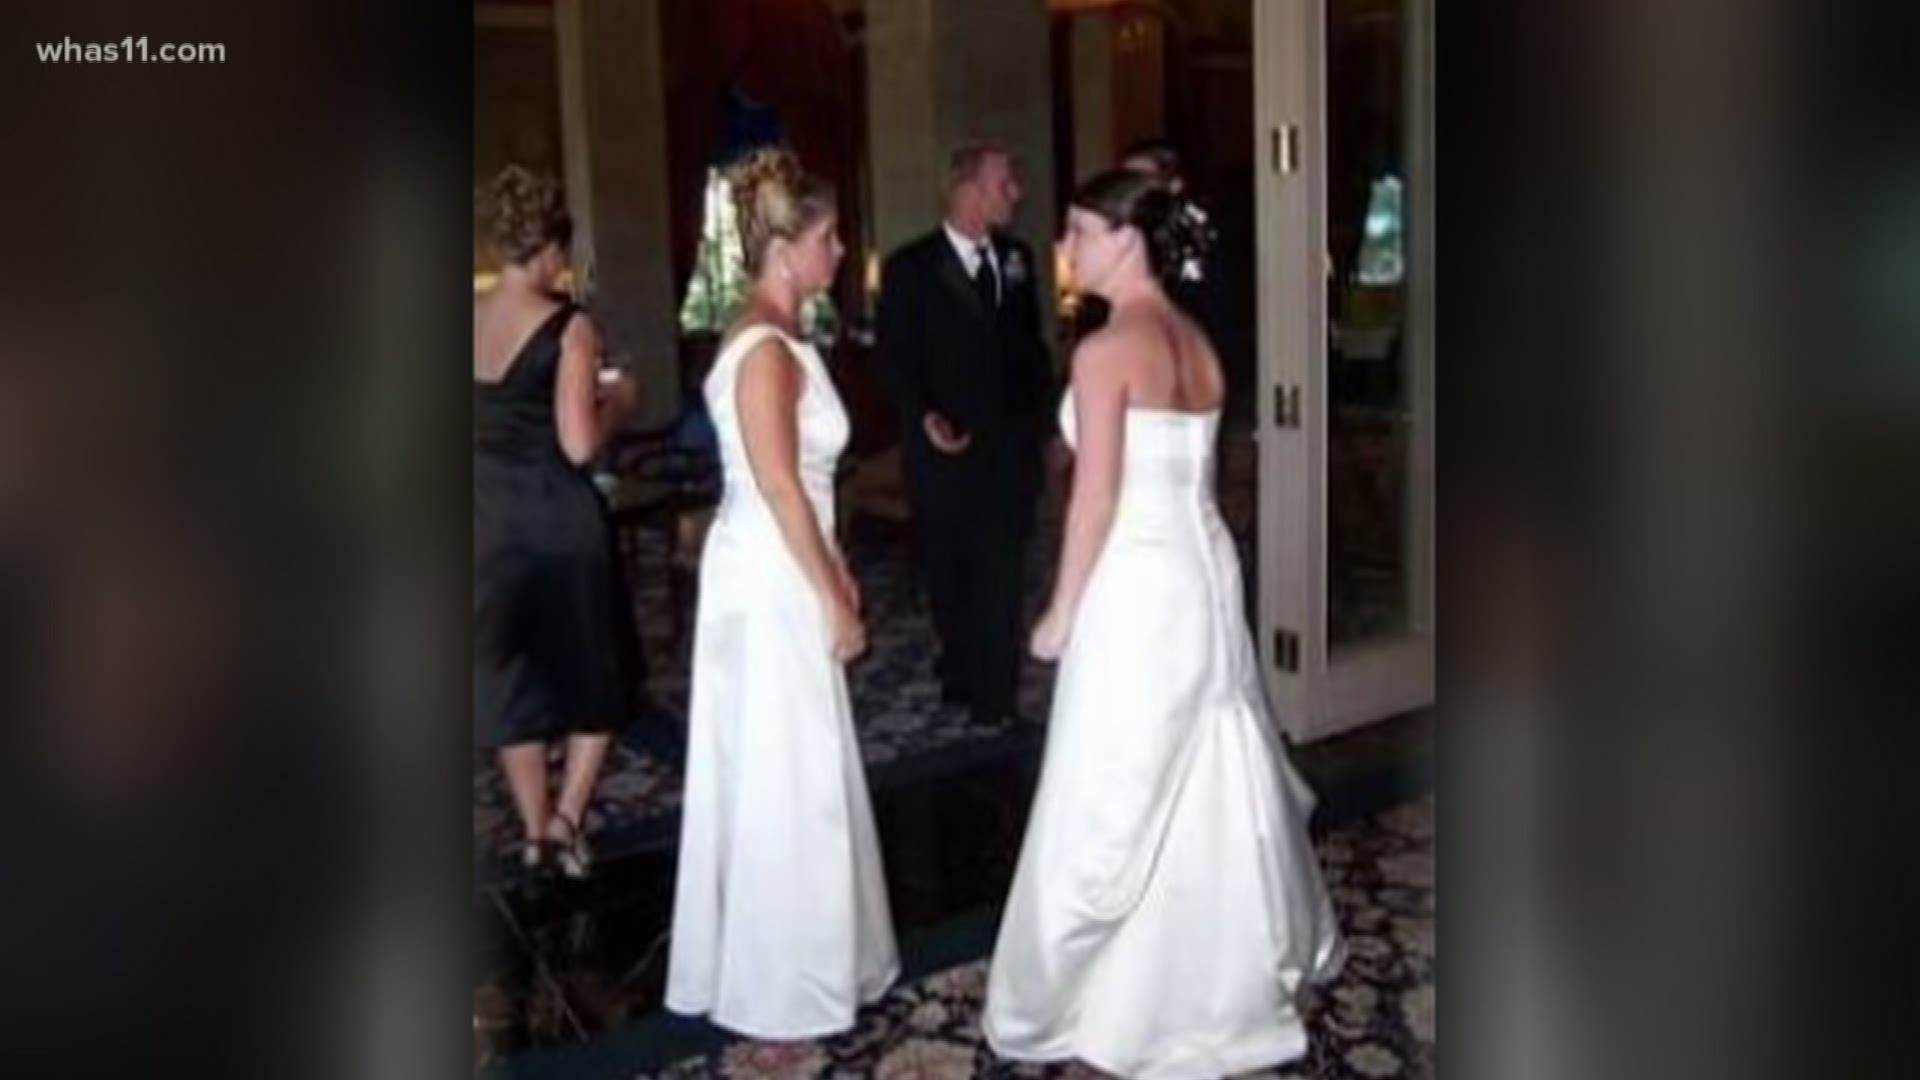 A bride posted a picture on Twitter showing her mother-in-law dressed in a wedding dress at her wedding.